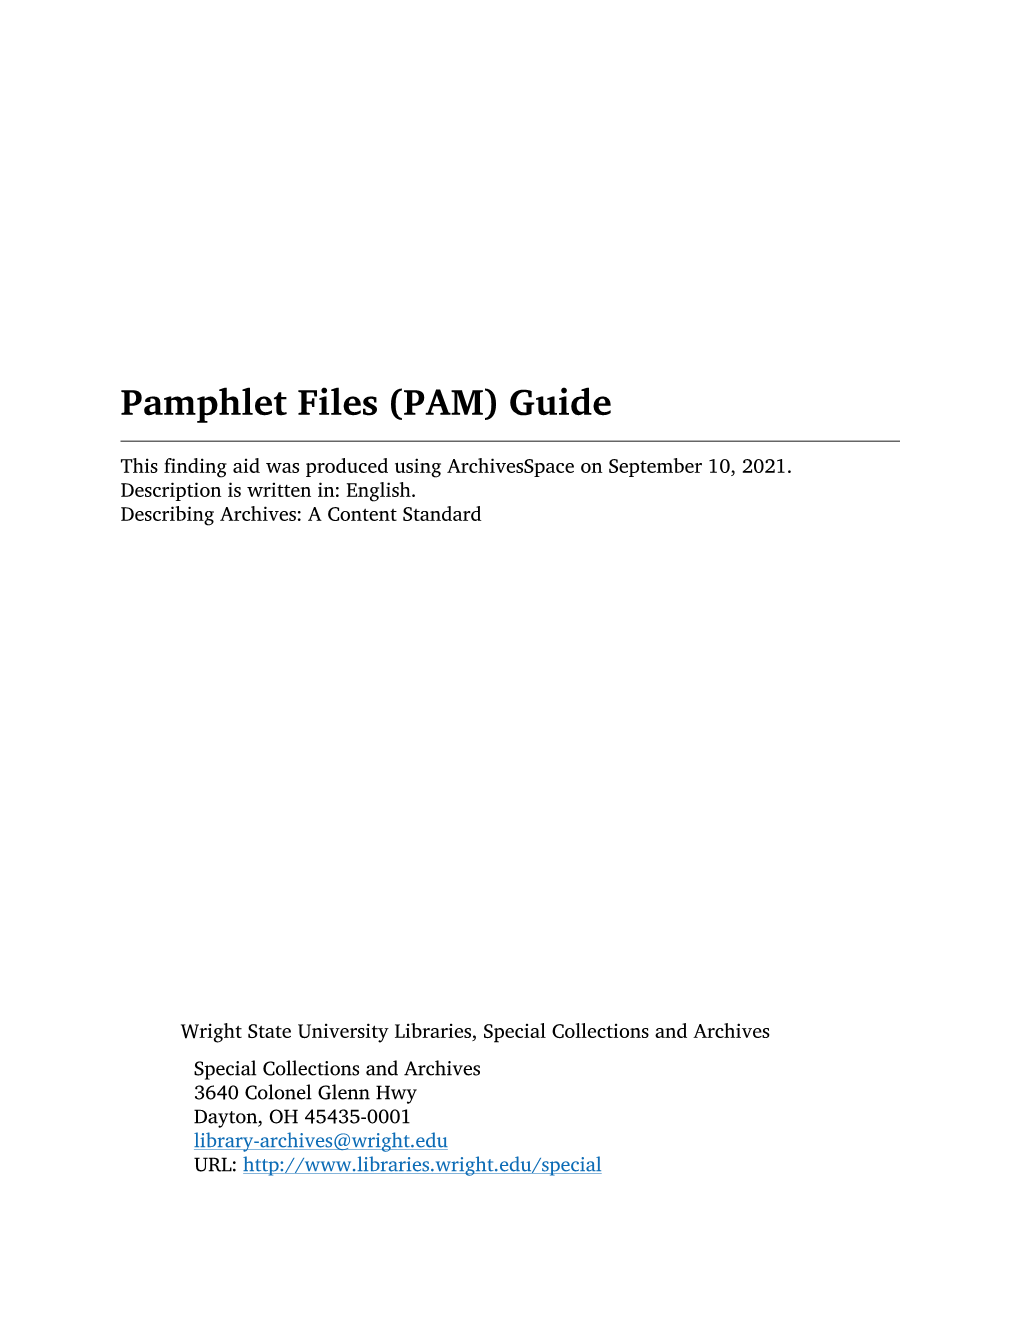 PAM: Pamphlet Files Finding